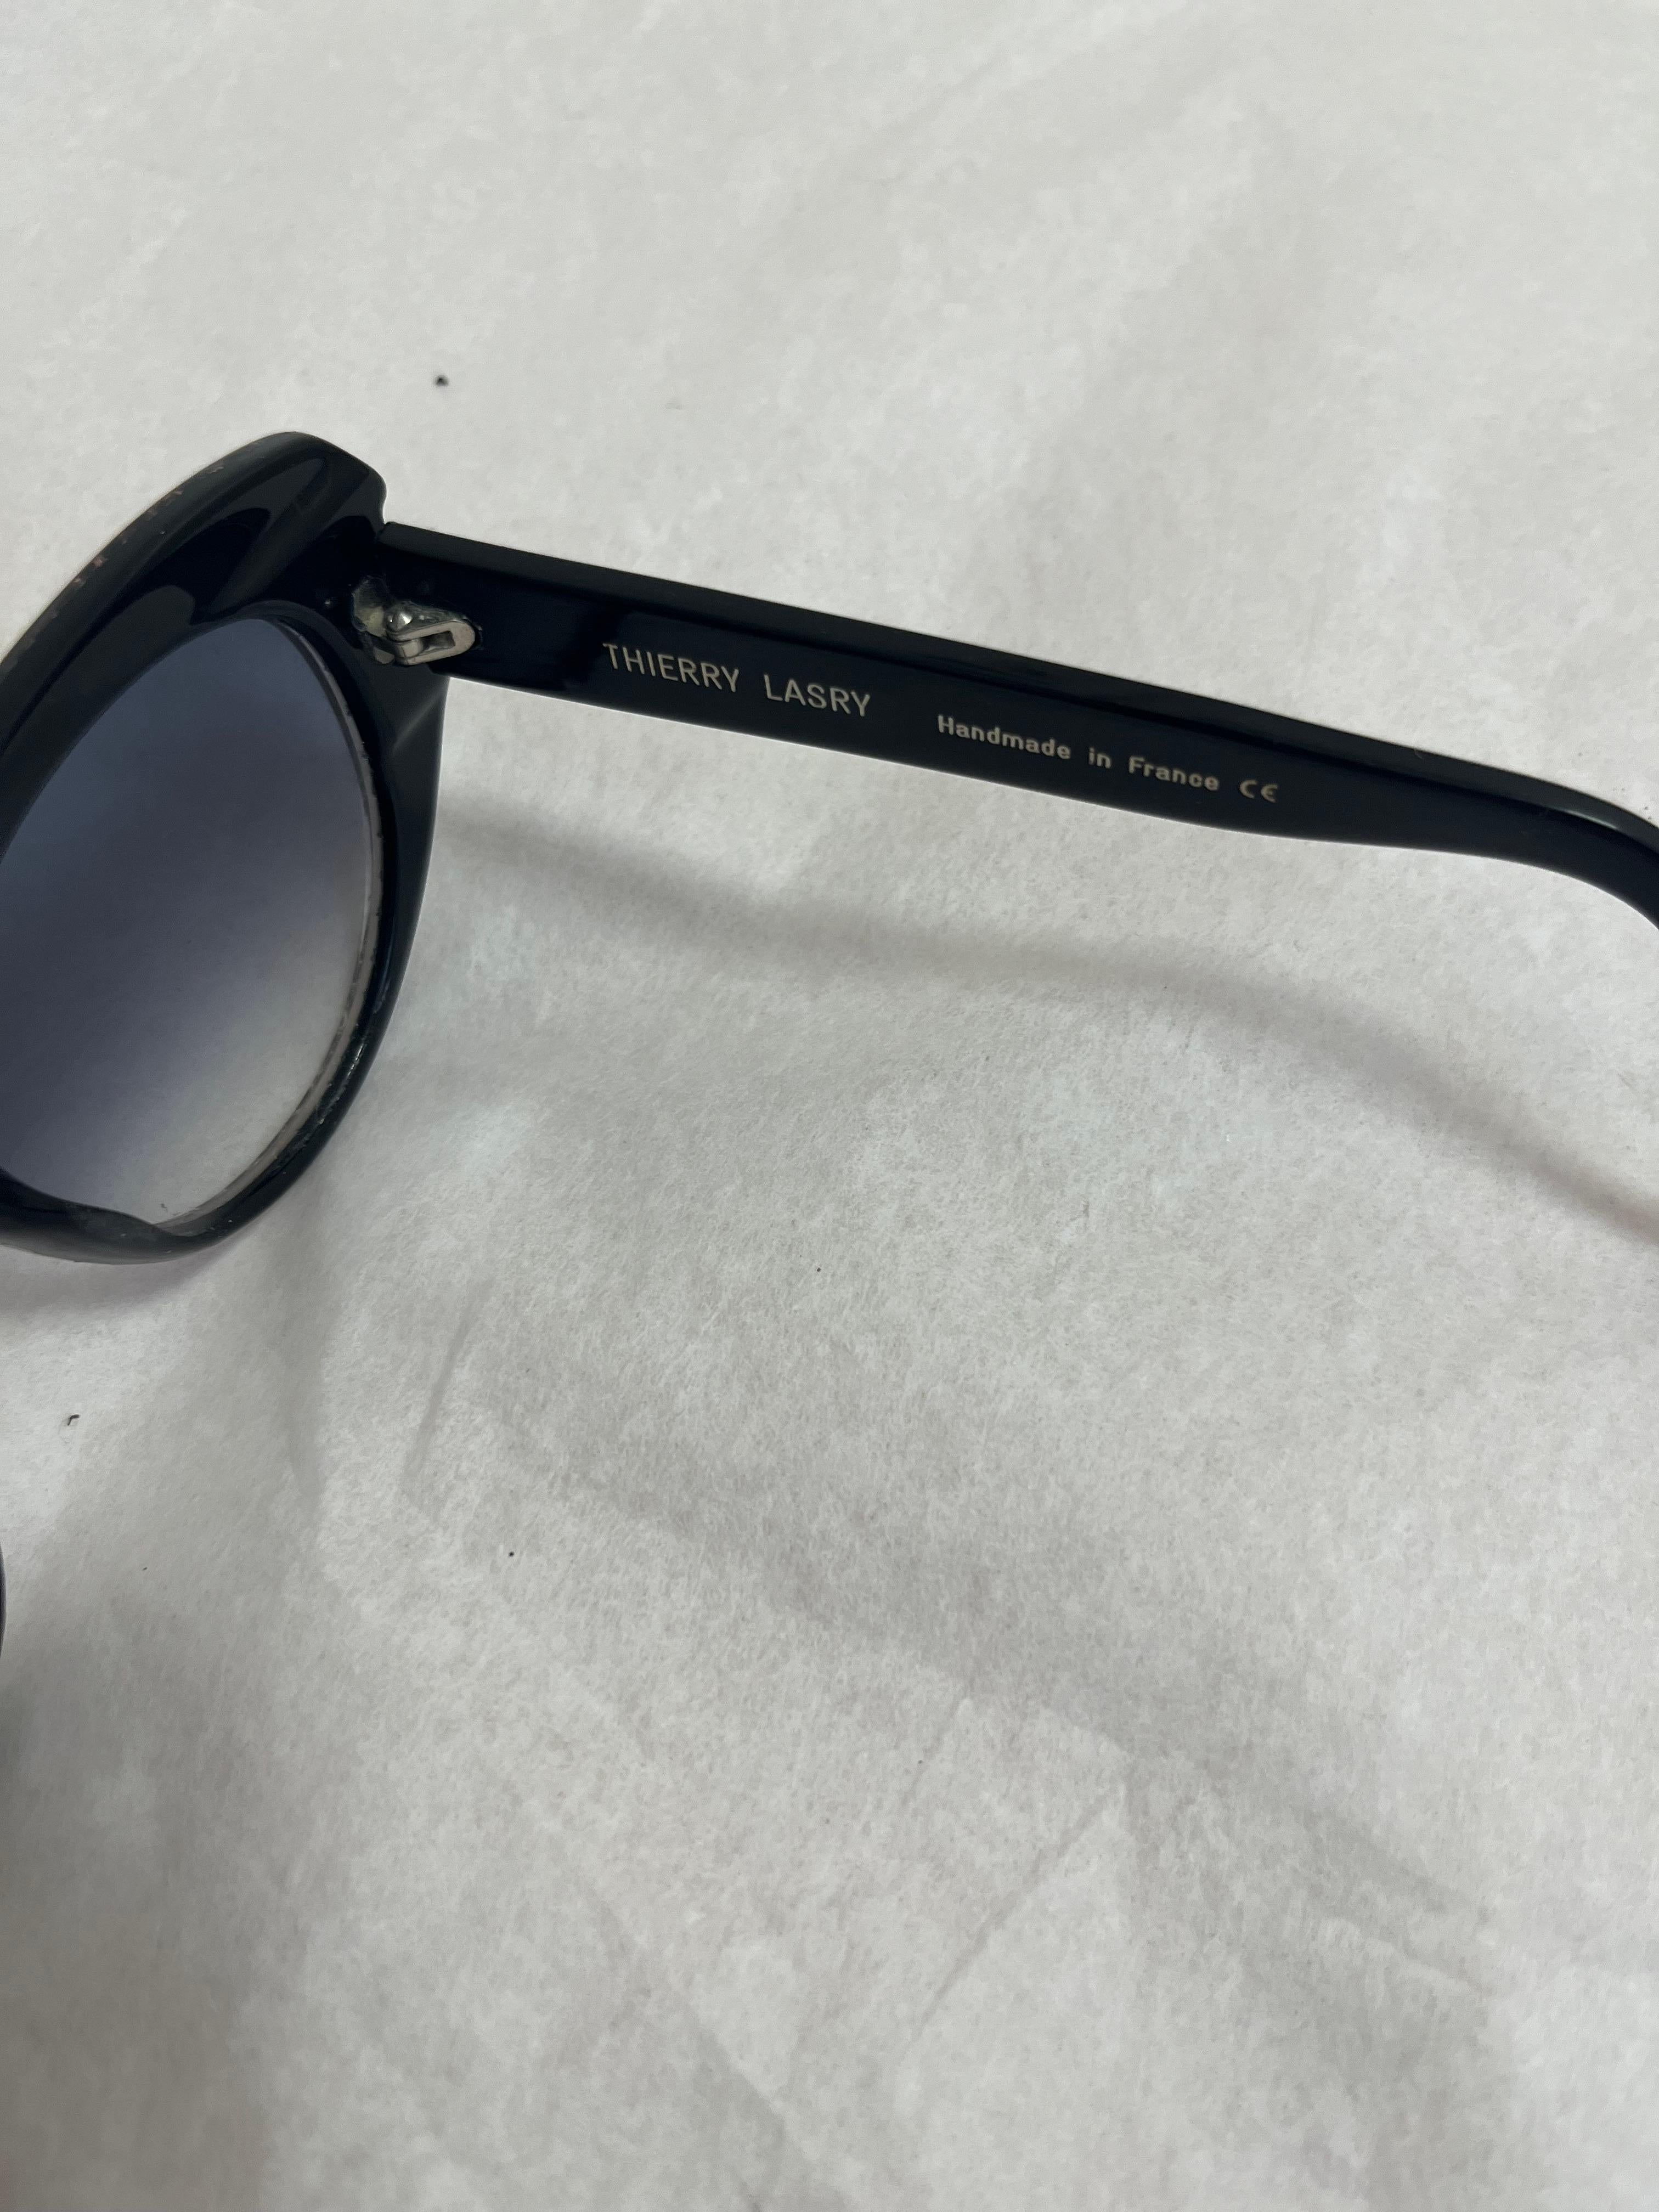 Thierry Lasry Sunglasses Hand Made in France For Sale 1